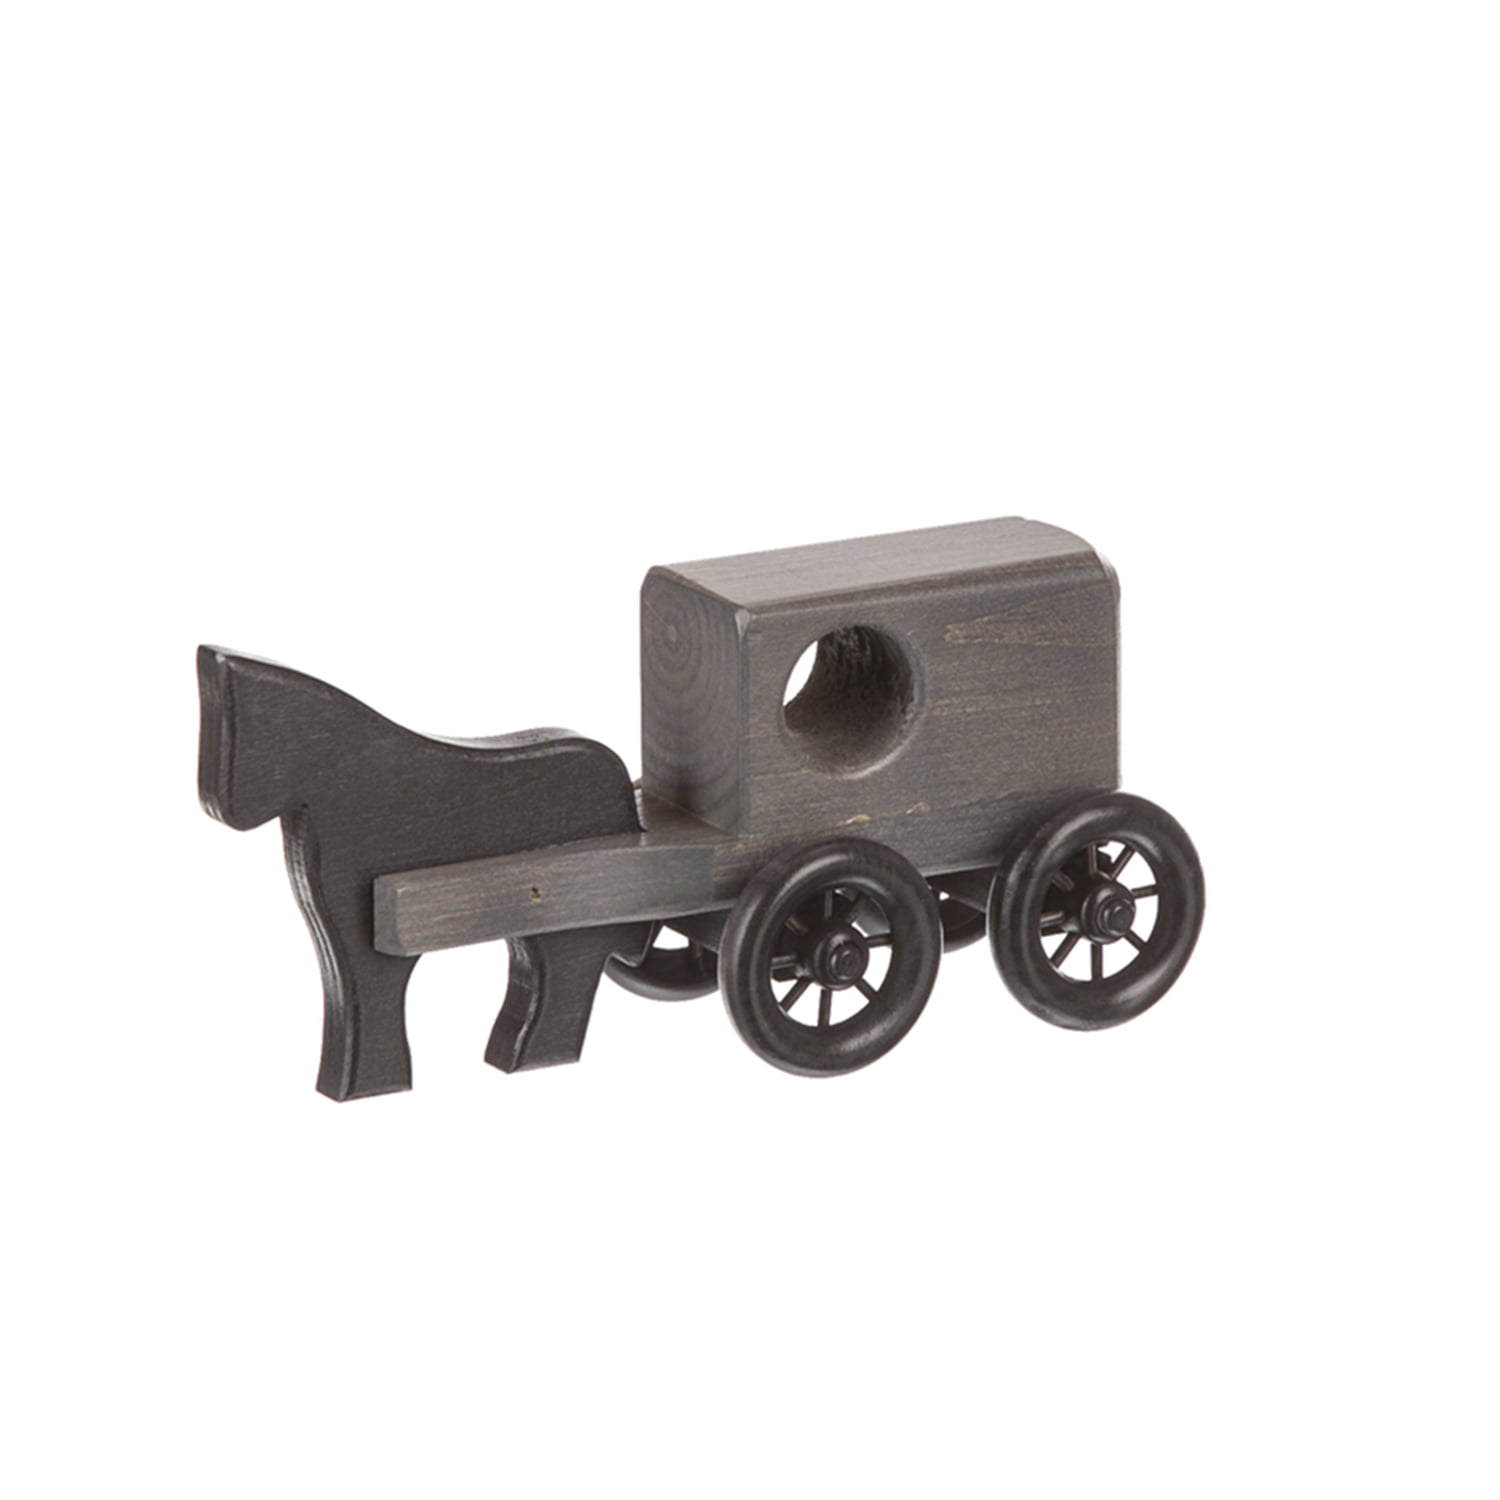 Children's Small Wood Horse and Buggy - Black/Grey